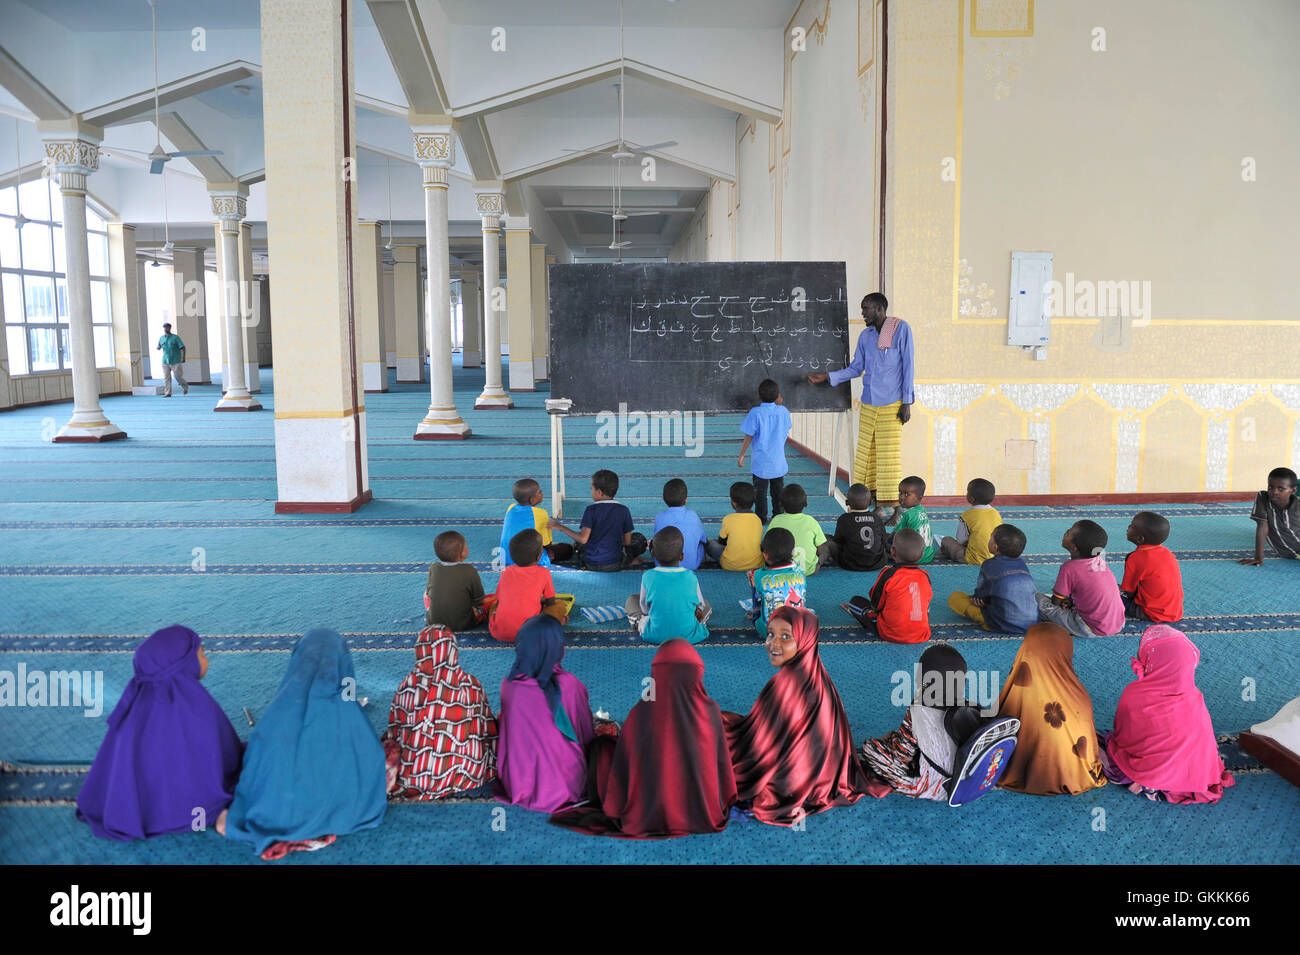 Somali children take lessons on the Quran at a Madrasa in Isbahaysiga mosque on June 16, 2015 as muslims prepare for the fasting month of Ramadan, the holiest month in the Islamic calendar.AMISOM Photo/Omar Abdisalan Stock Photo